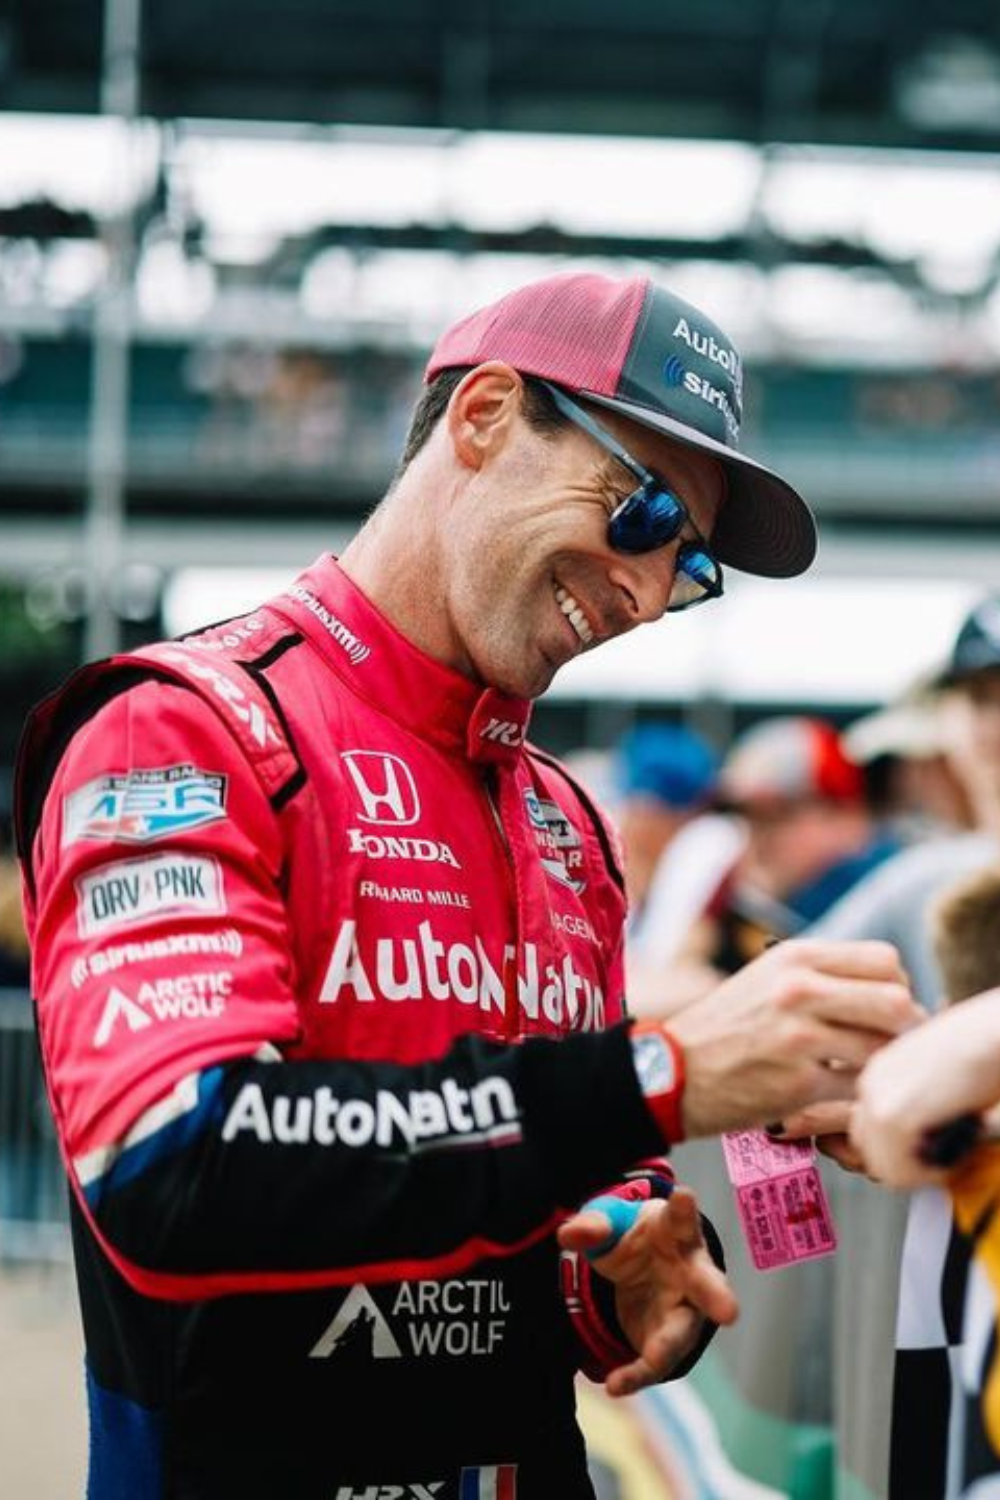 Simon Pagenaud Giving Autograph To Fan After Race